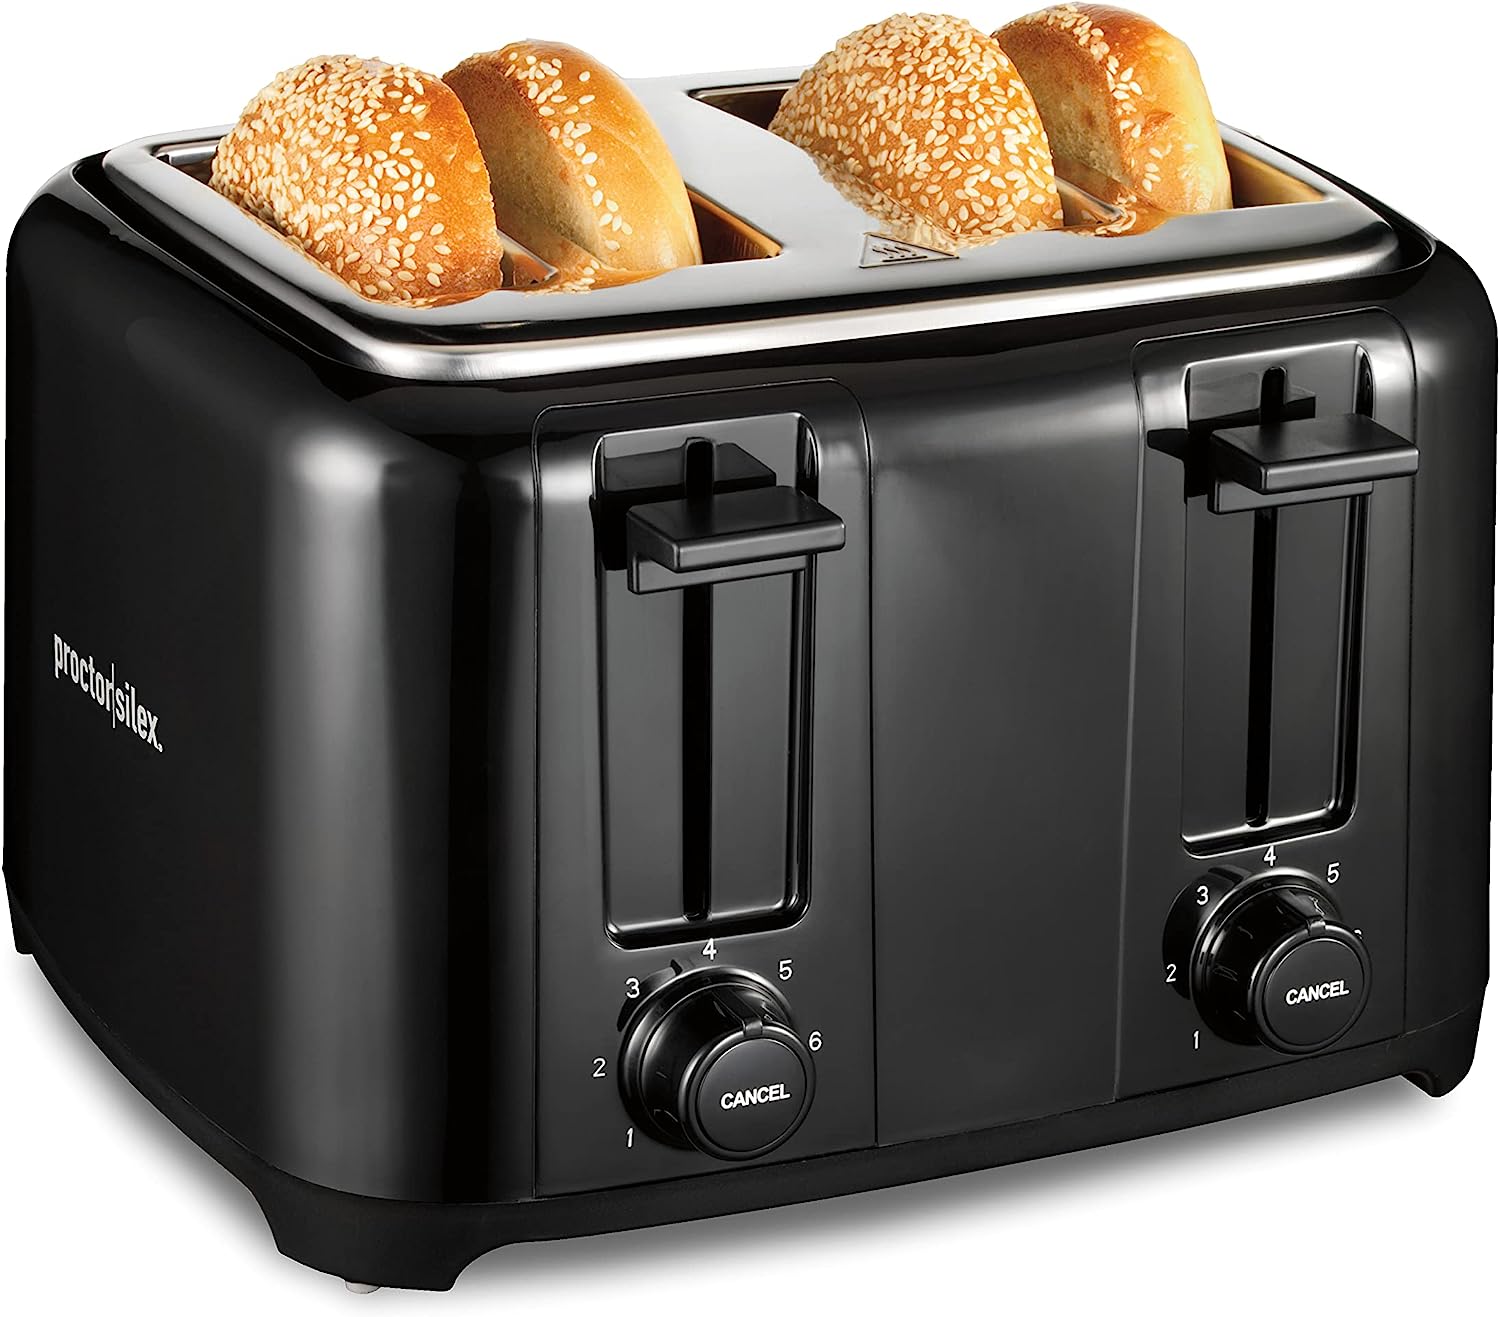 Proctor Silex 4 Slice Toaster with Extra Wide Slots [...]